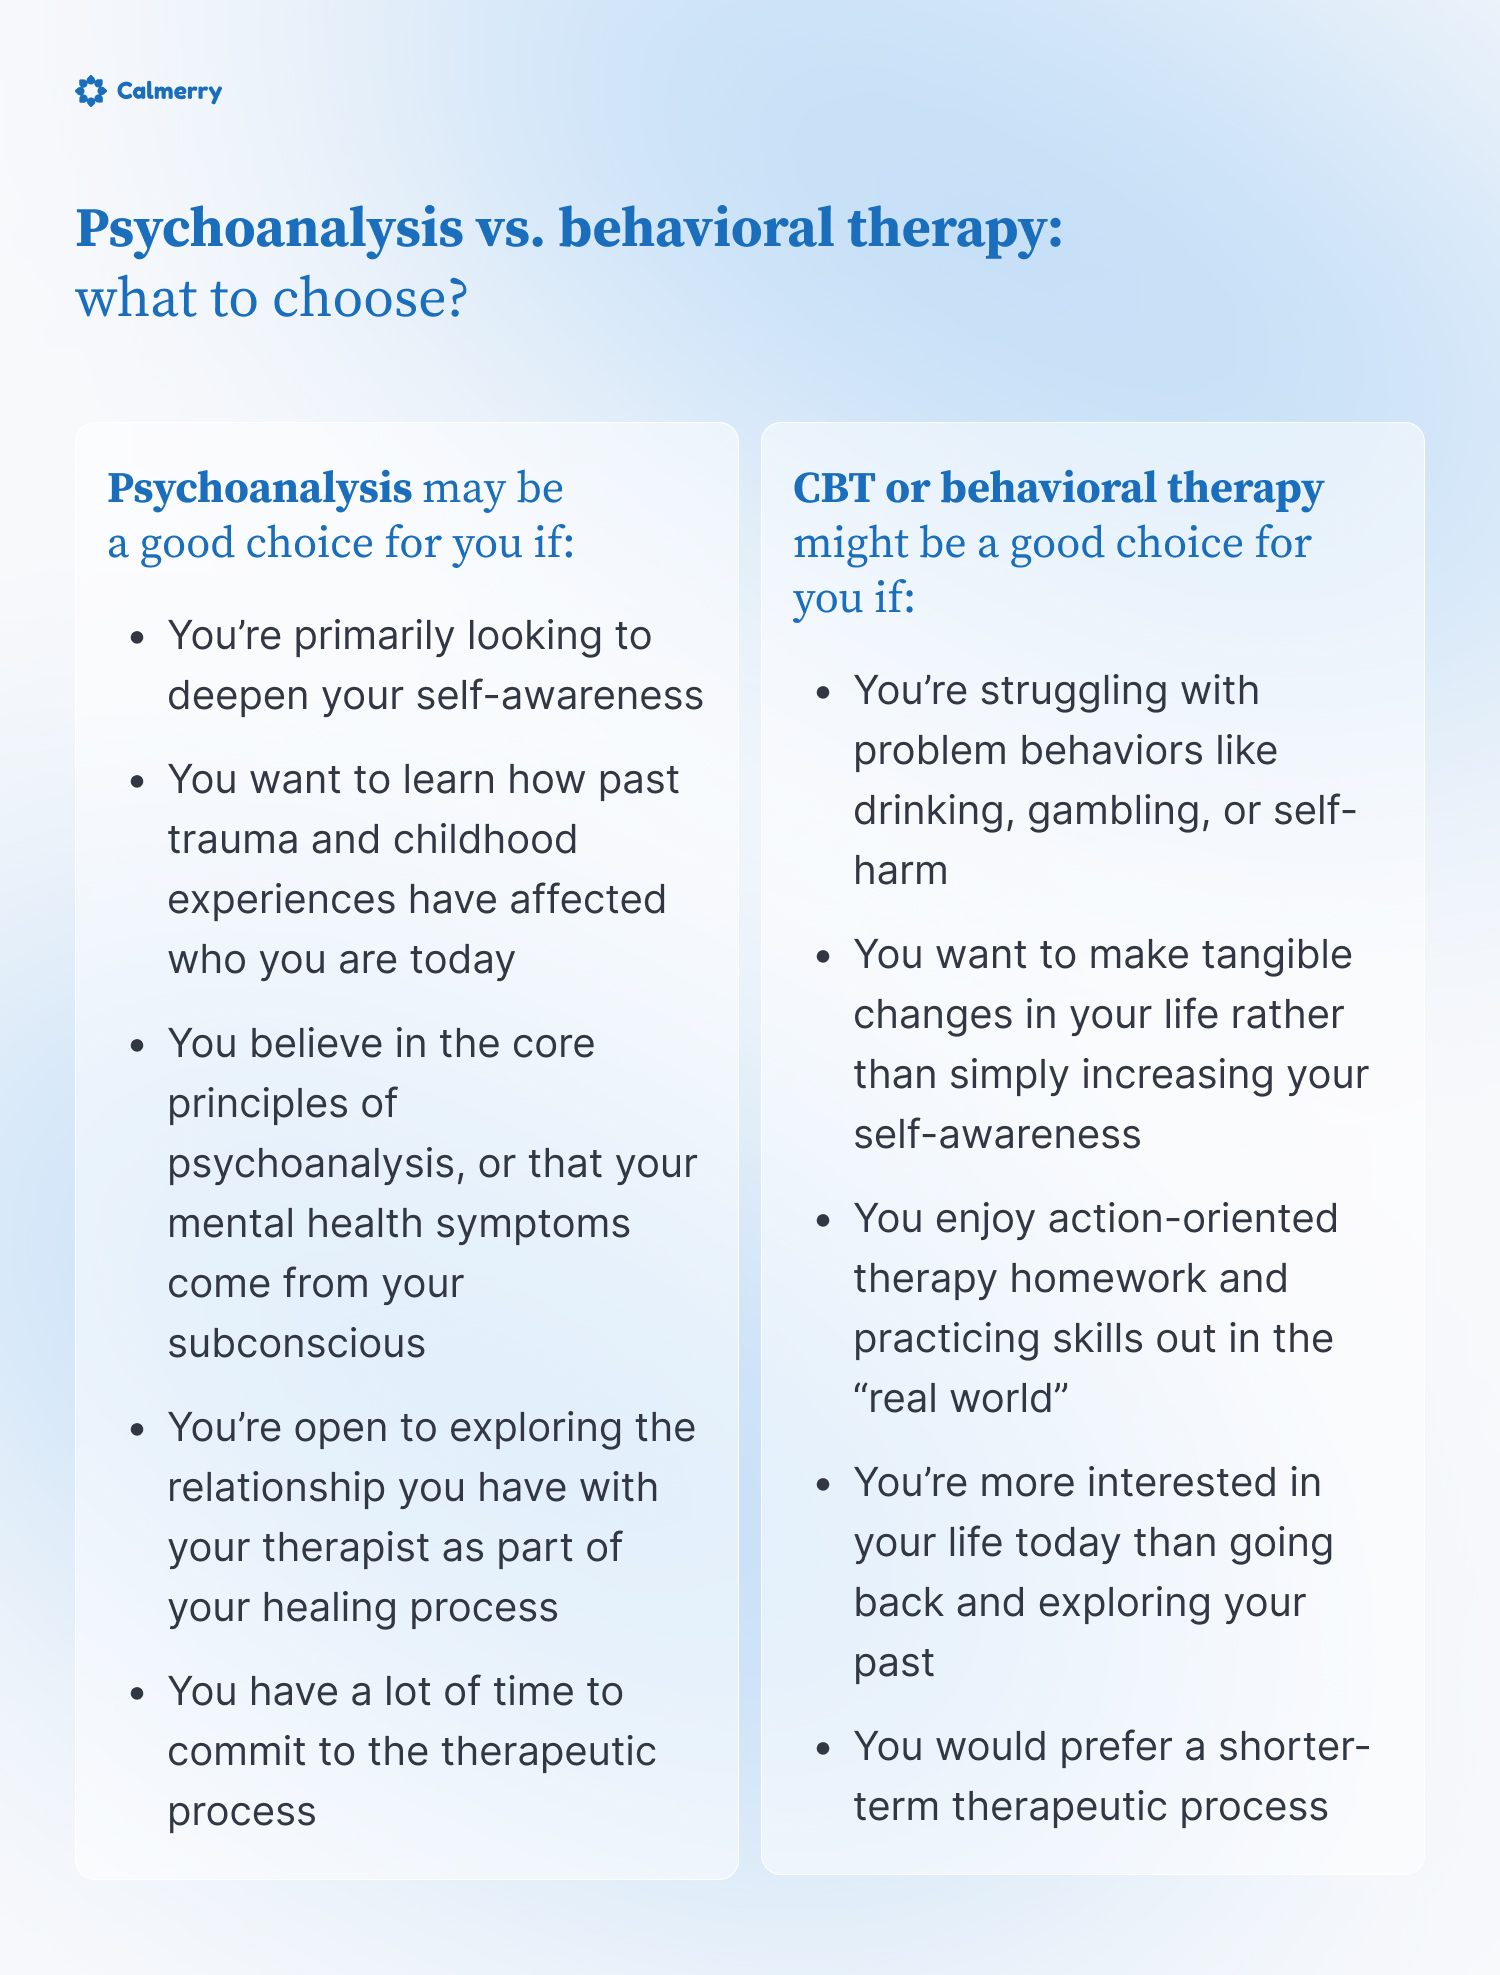 Psychoanalysis vs. behavioral therapy: what to choose?  Psychoanalysis may be a good choice for you if:  You’re primarily looking to deepen your self-awareness You want to learn how past trauma and childhood experiences have affected who you are today You believe in the core principles of psychoanalysis, or that your mental health symptoms come from your subconscious You’re open to exploring the relationship you have with your therapist as part of your healing process You have a lot of time to commit to the therapeutic process  CBT or behavioral therapy might be a good choice for you if:  You’re struggling with problem behaviors like drinking, gambling, or self-harm You want to make tangible changes in your life rather than simply increasing your self-awareness You enjoy action-oriented therapy homework and practicing skills out in the “real world” You’re more interested in your life today than going back and exploring your past You would prefer a shorter-term therapeutic process